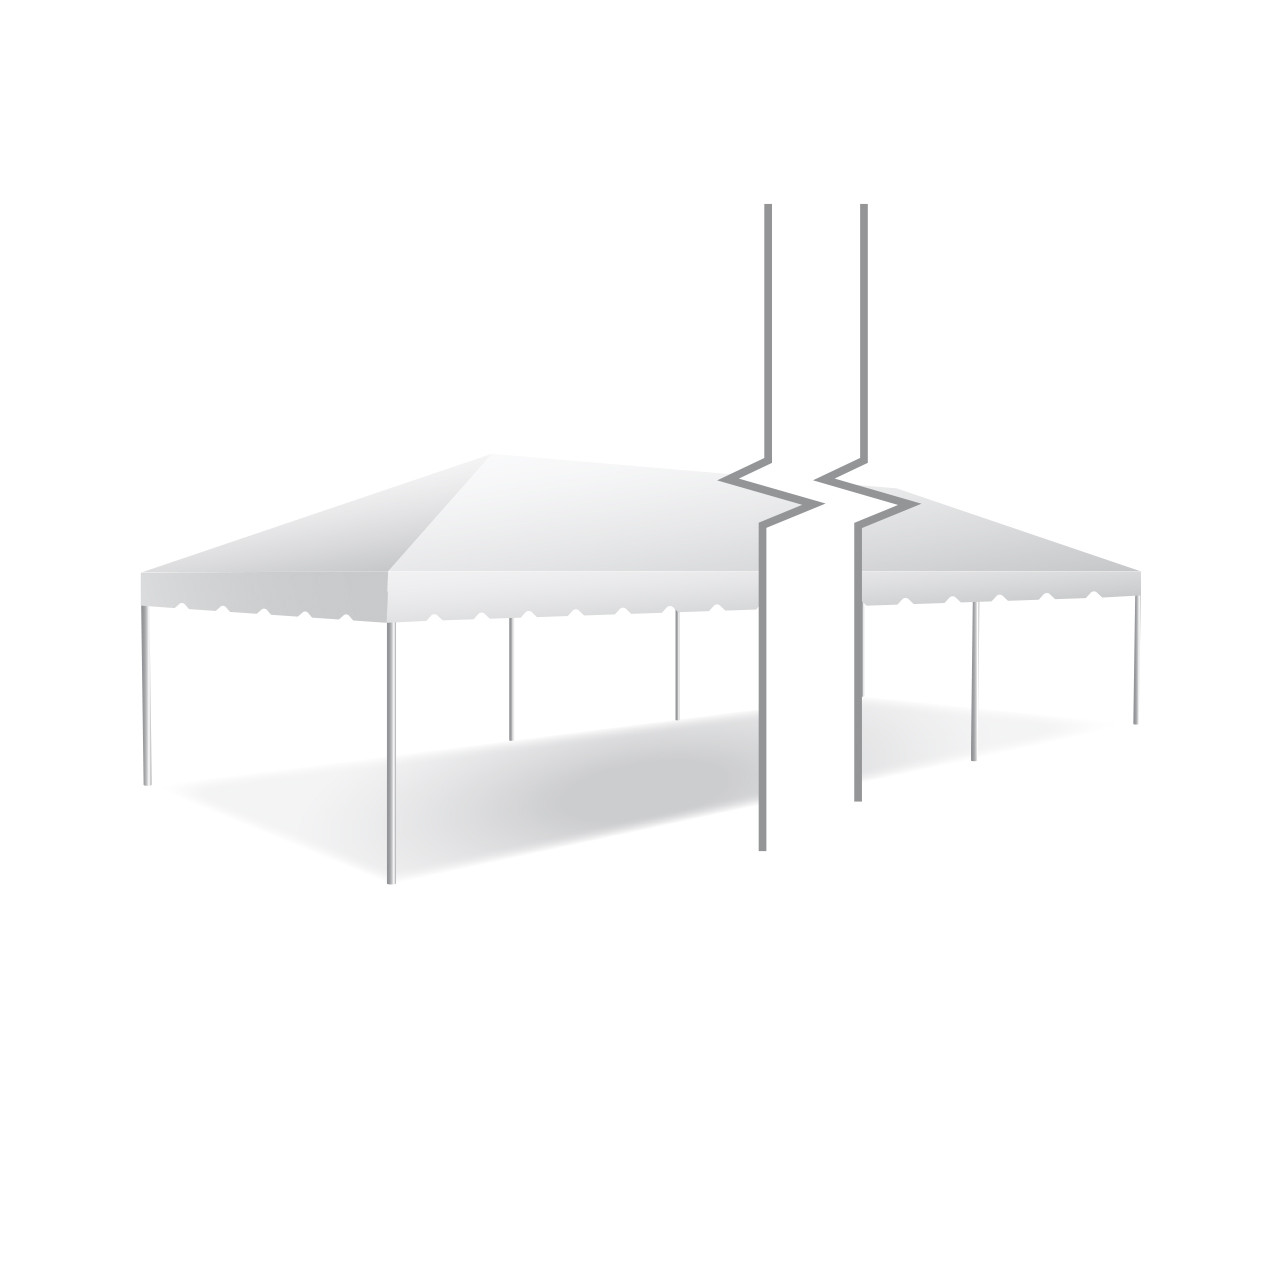 15' x 50' Classic Series Frame Tent, 1 Piece Tent Top, Complete